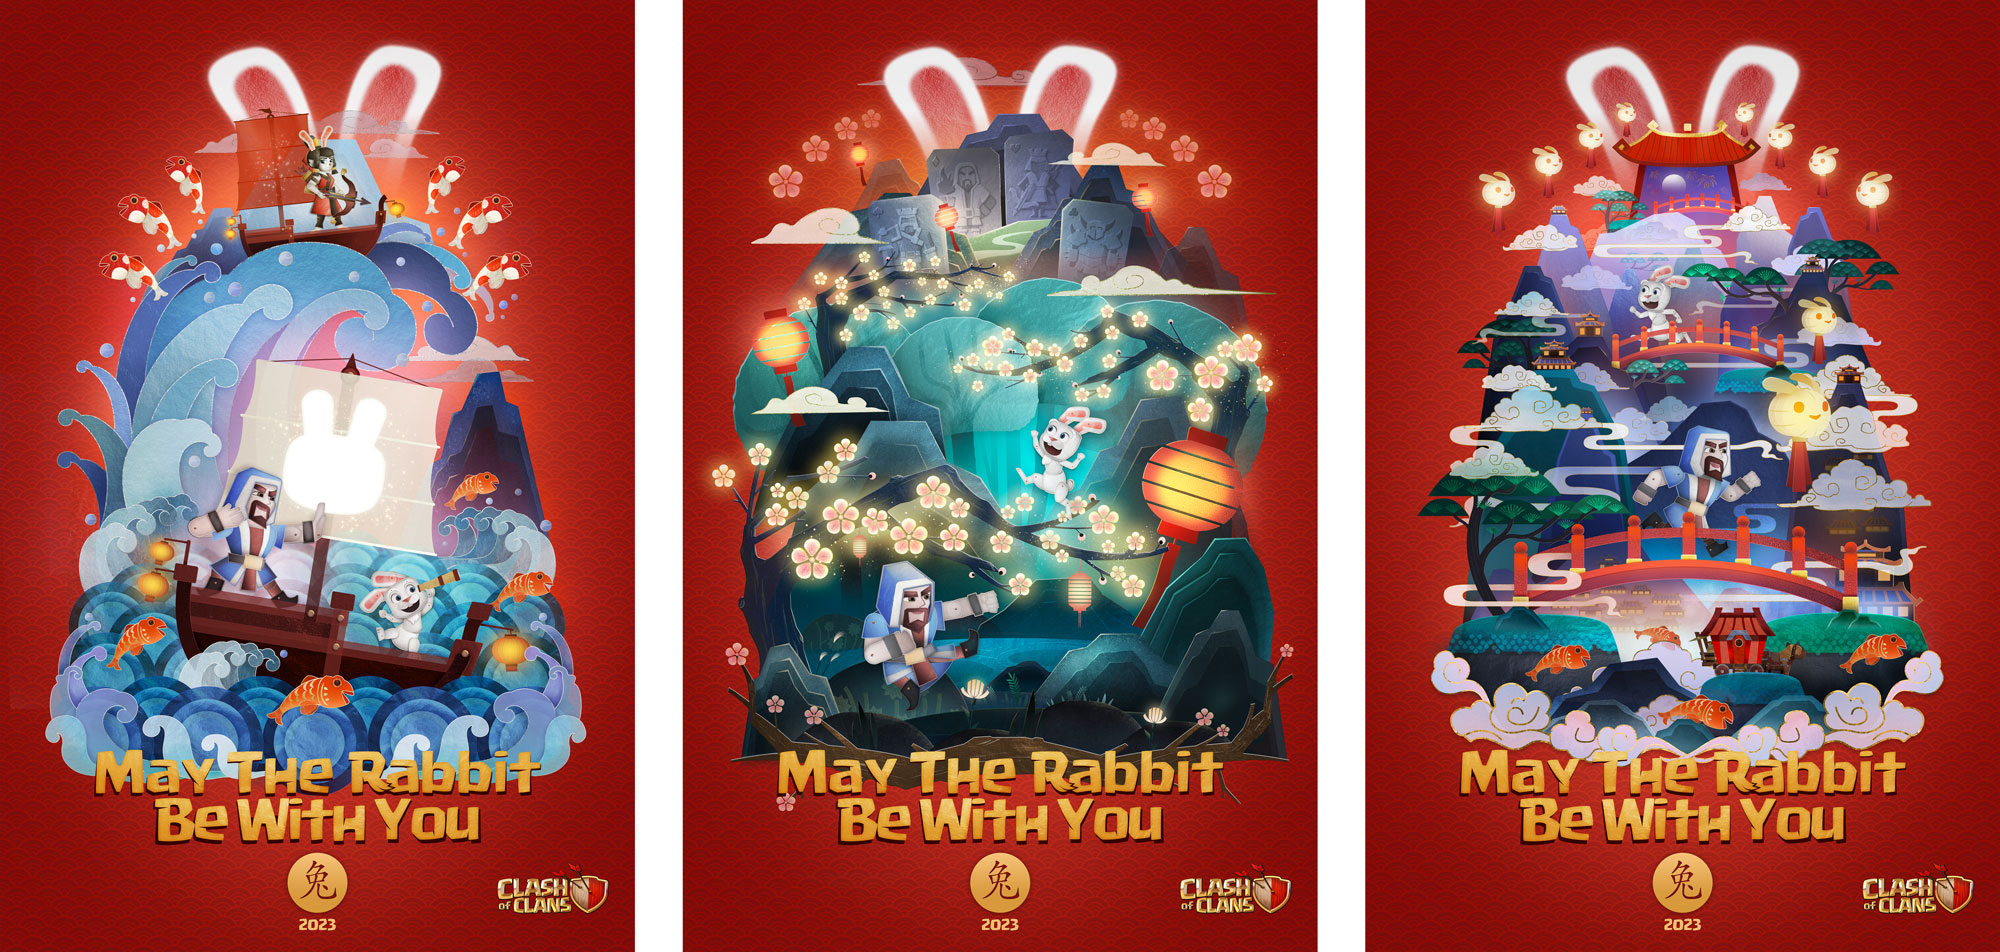 Clash Of Clans Reveals Year Of The Rabbit Promotional Video, Skins, & Spring Festival Content 7